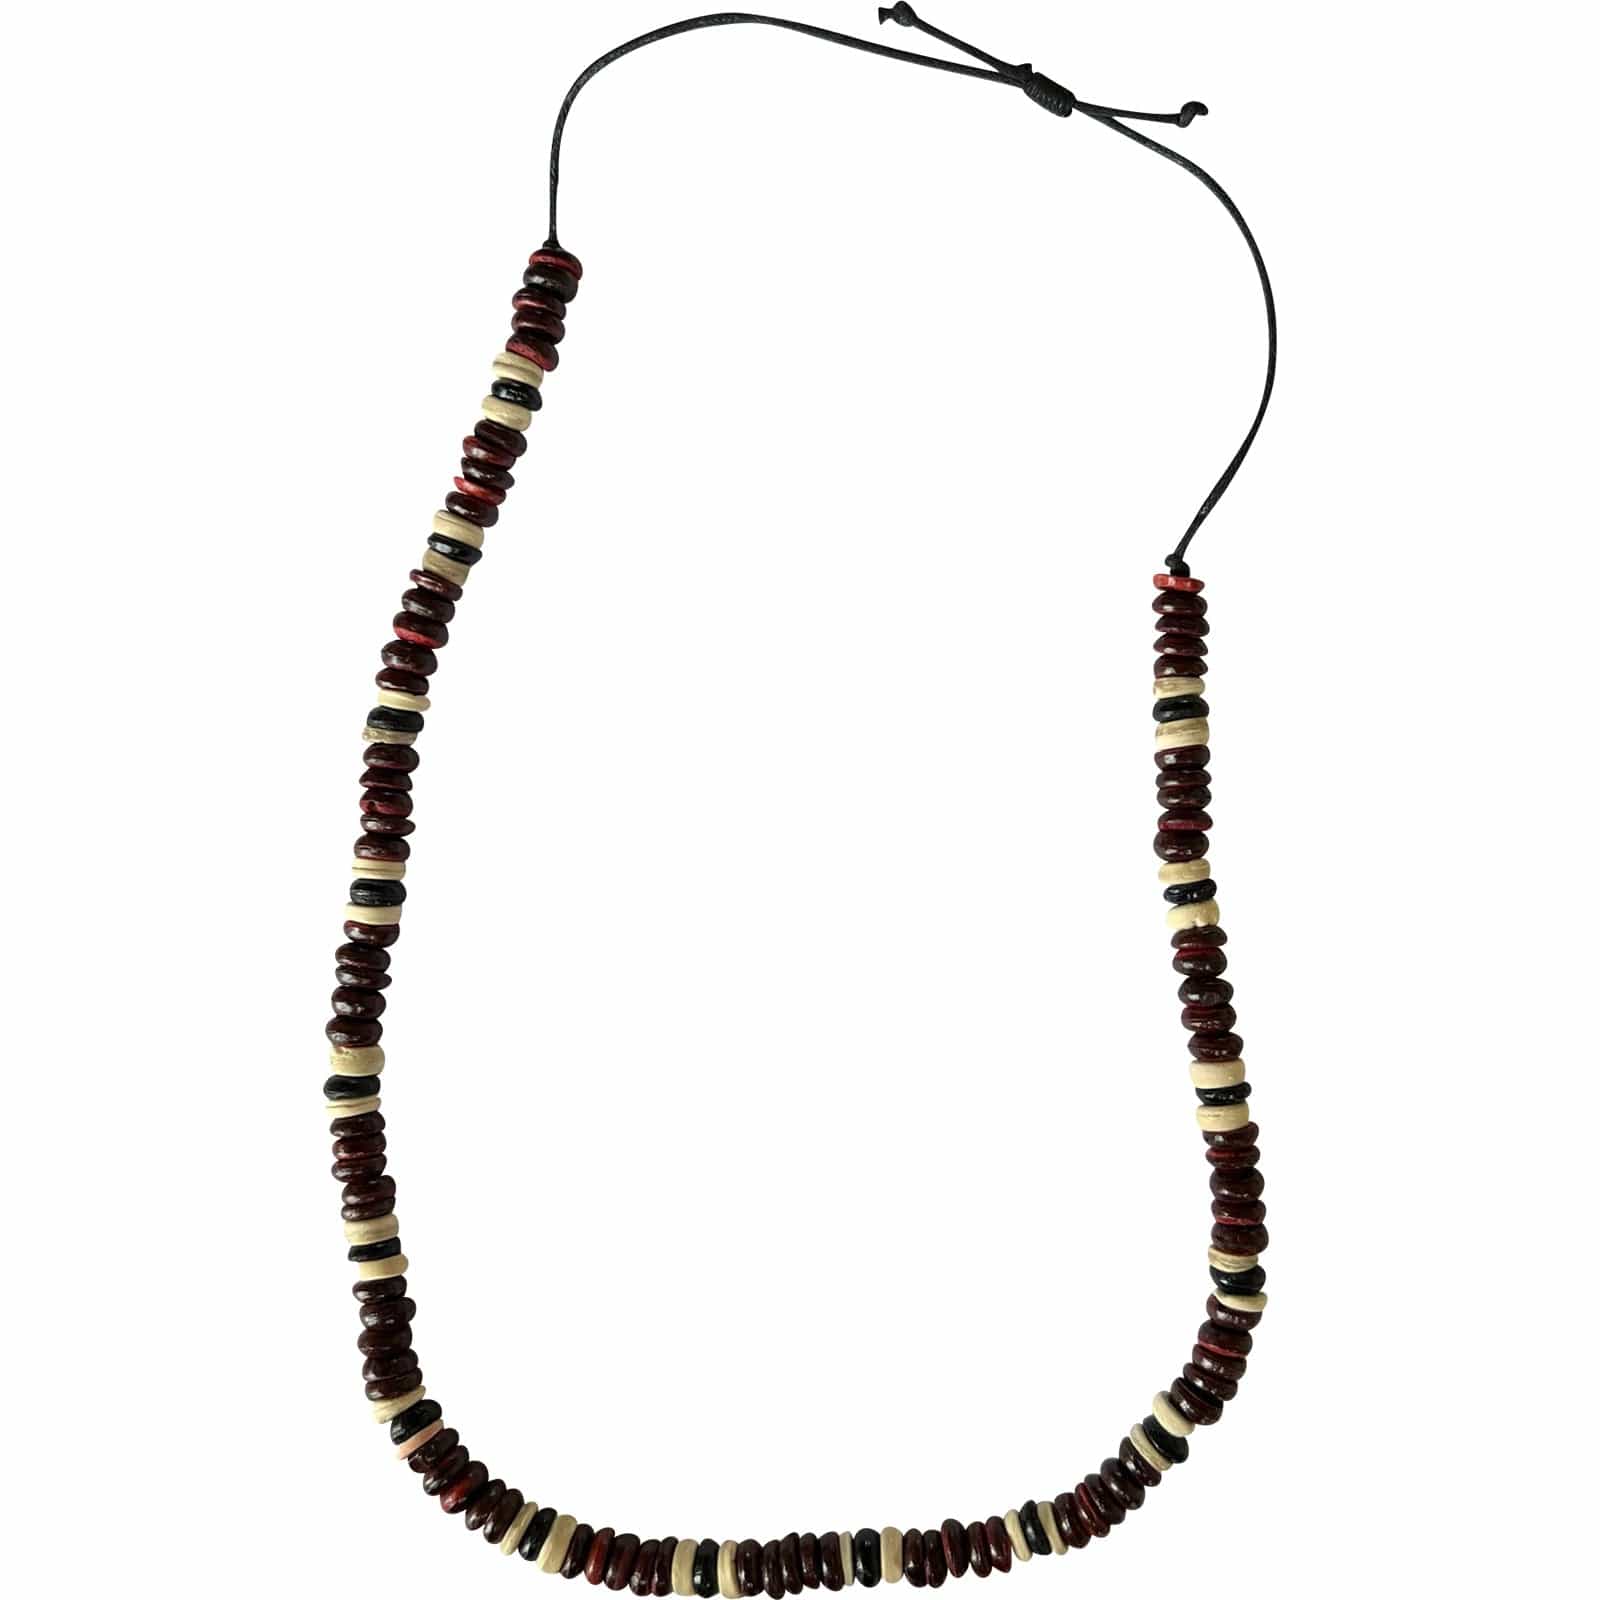 Adjustable Size Red Brown Wooden Coconut Bead Necklace Chain Handmade Jewellery